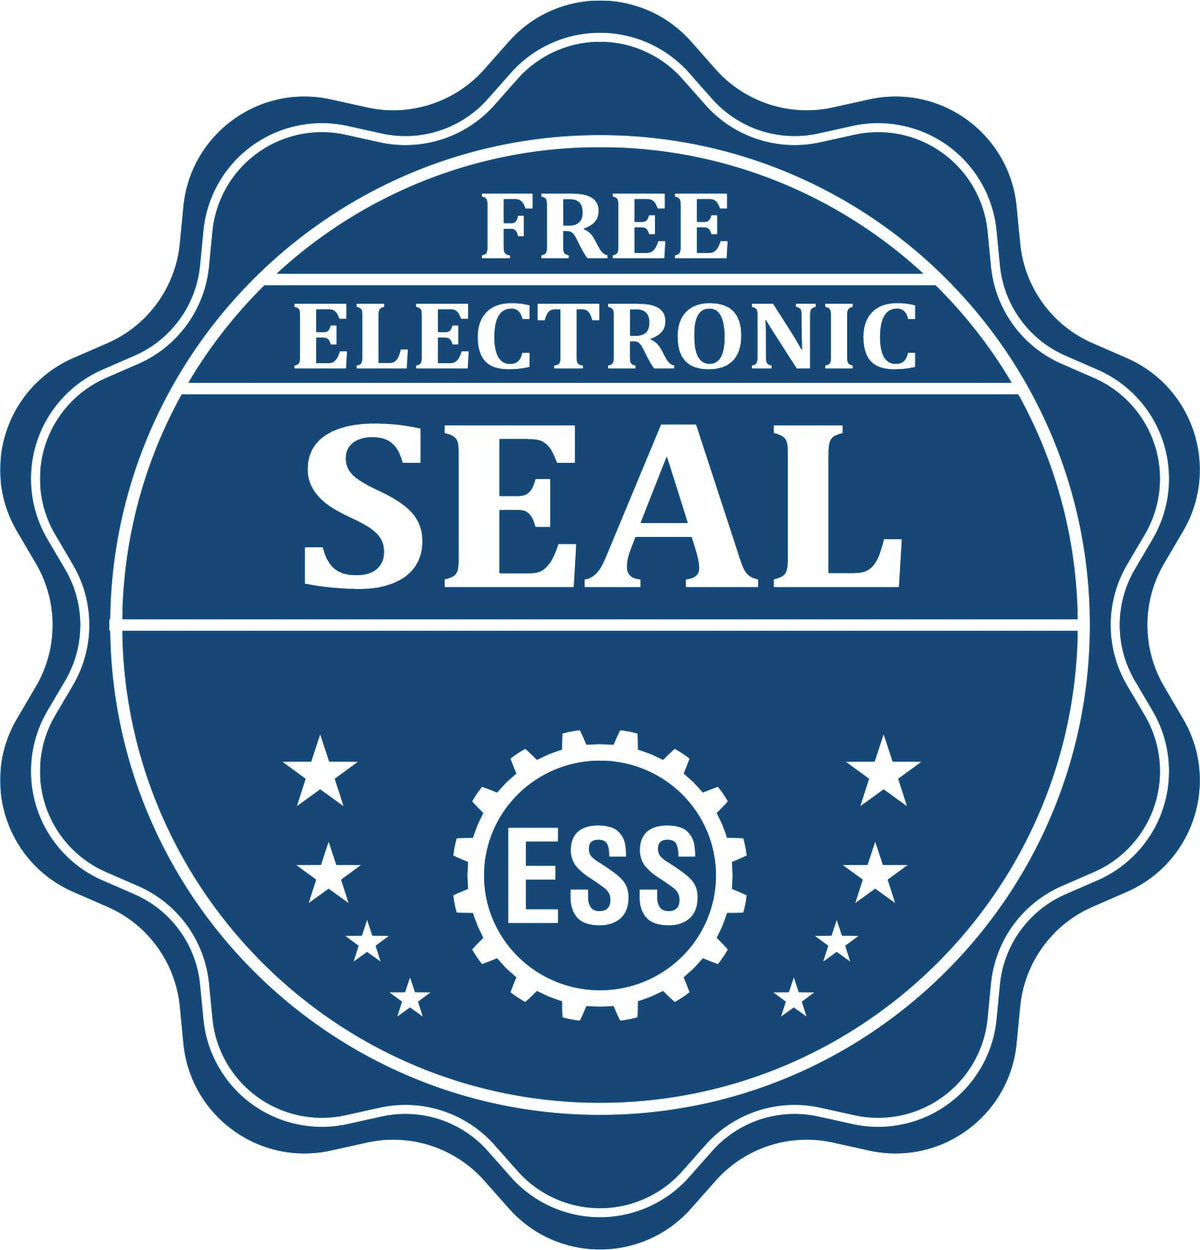 A badge showing a free electronic seal for the Hybrid Maine Geologist Seal with stars and the ESS gear on the emblem.